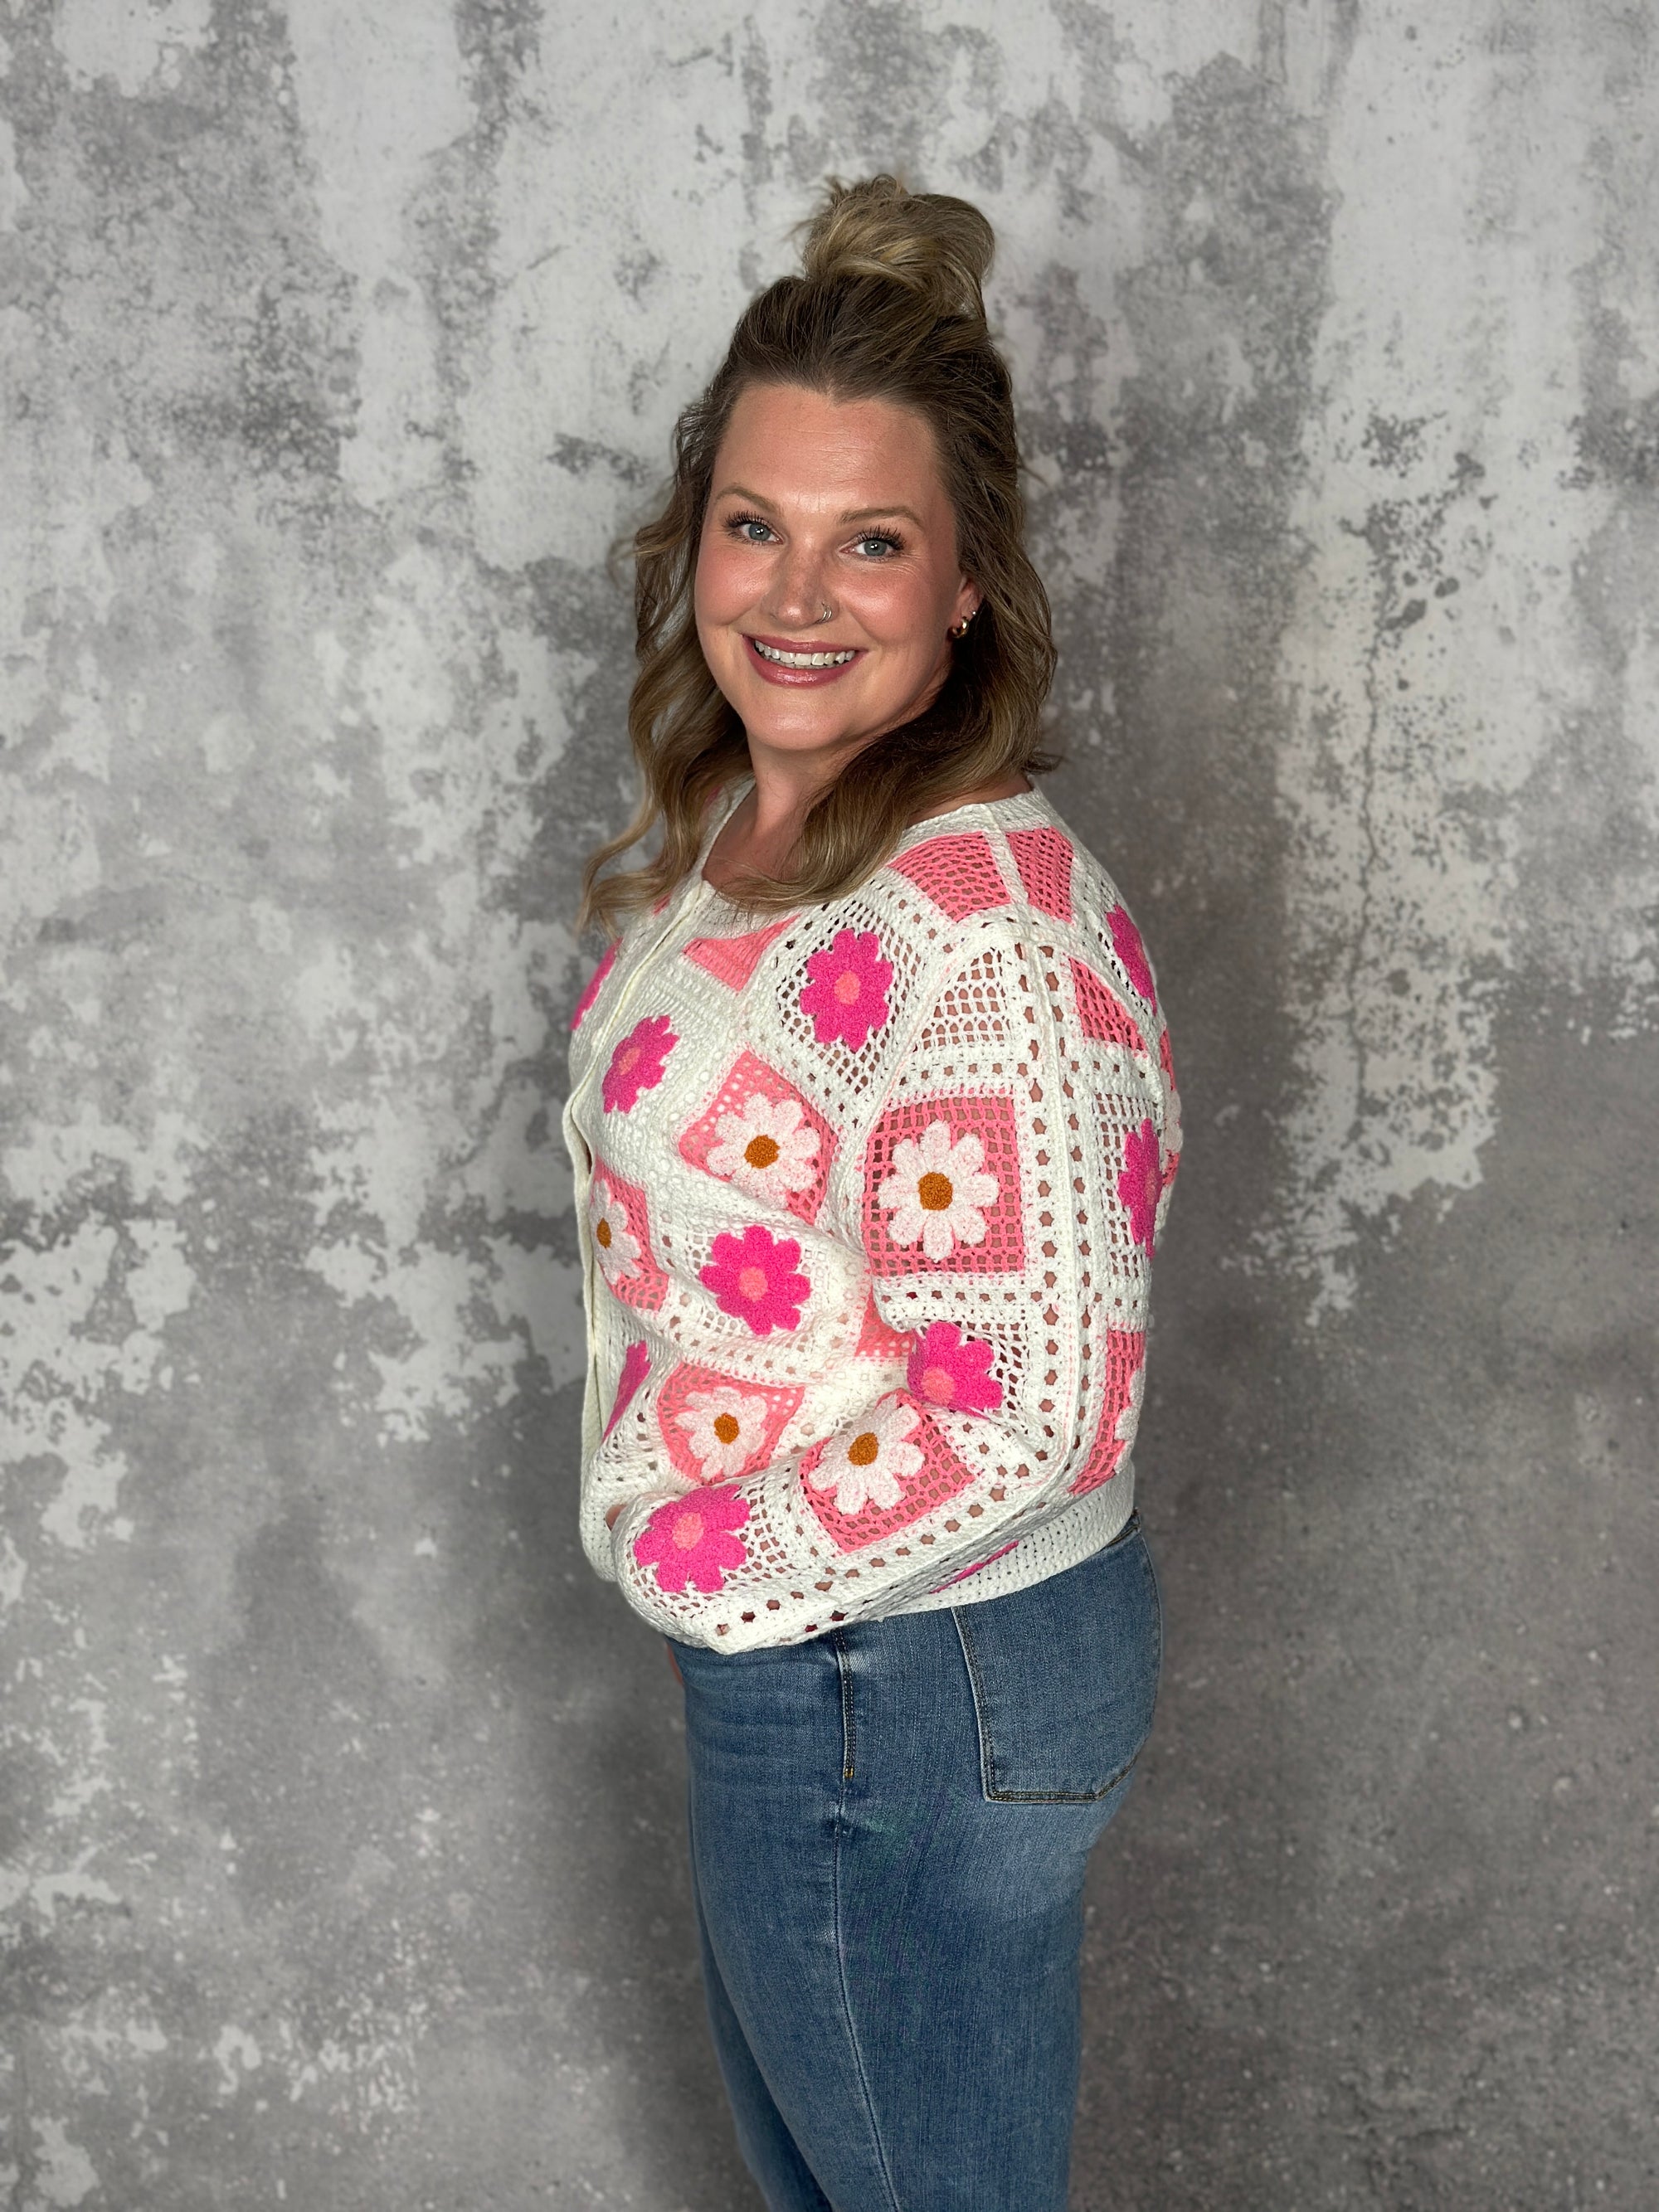 Neon Pink and White Knit Floral Cardigan/Sweater (LARGE LEFT)